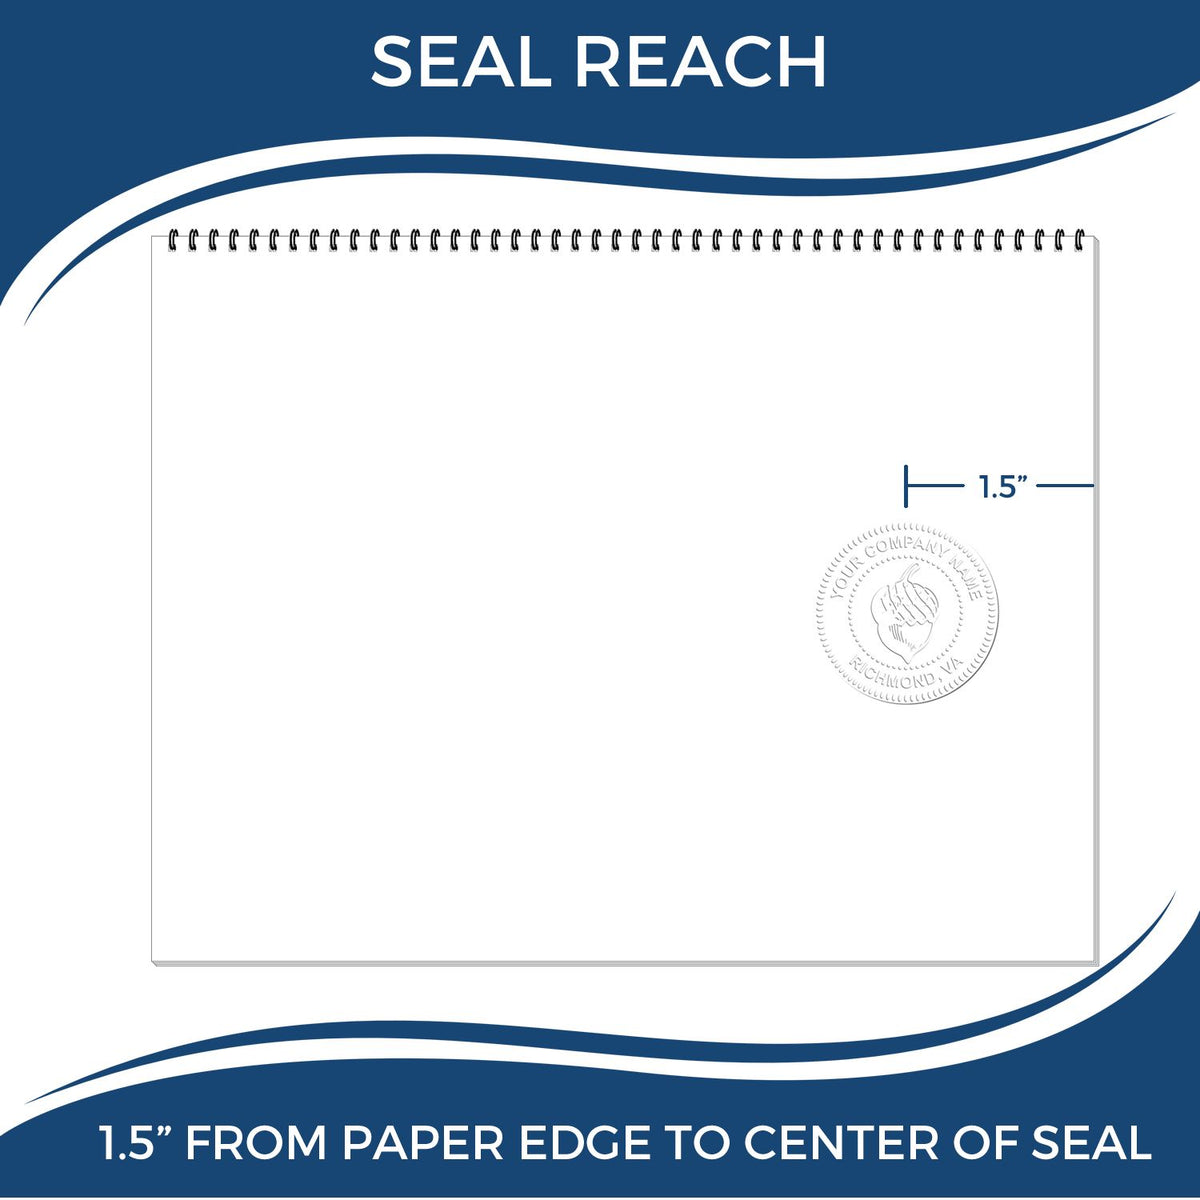 An infographic showing the seal reach which is represented by a ruler and a miniature seal image of the State of Kansas Soft Land Surveyor Embossing Seal